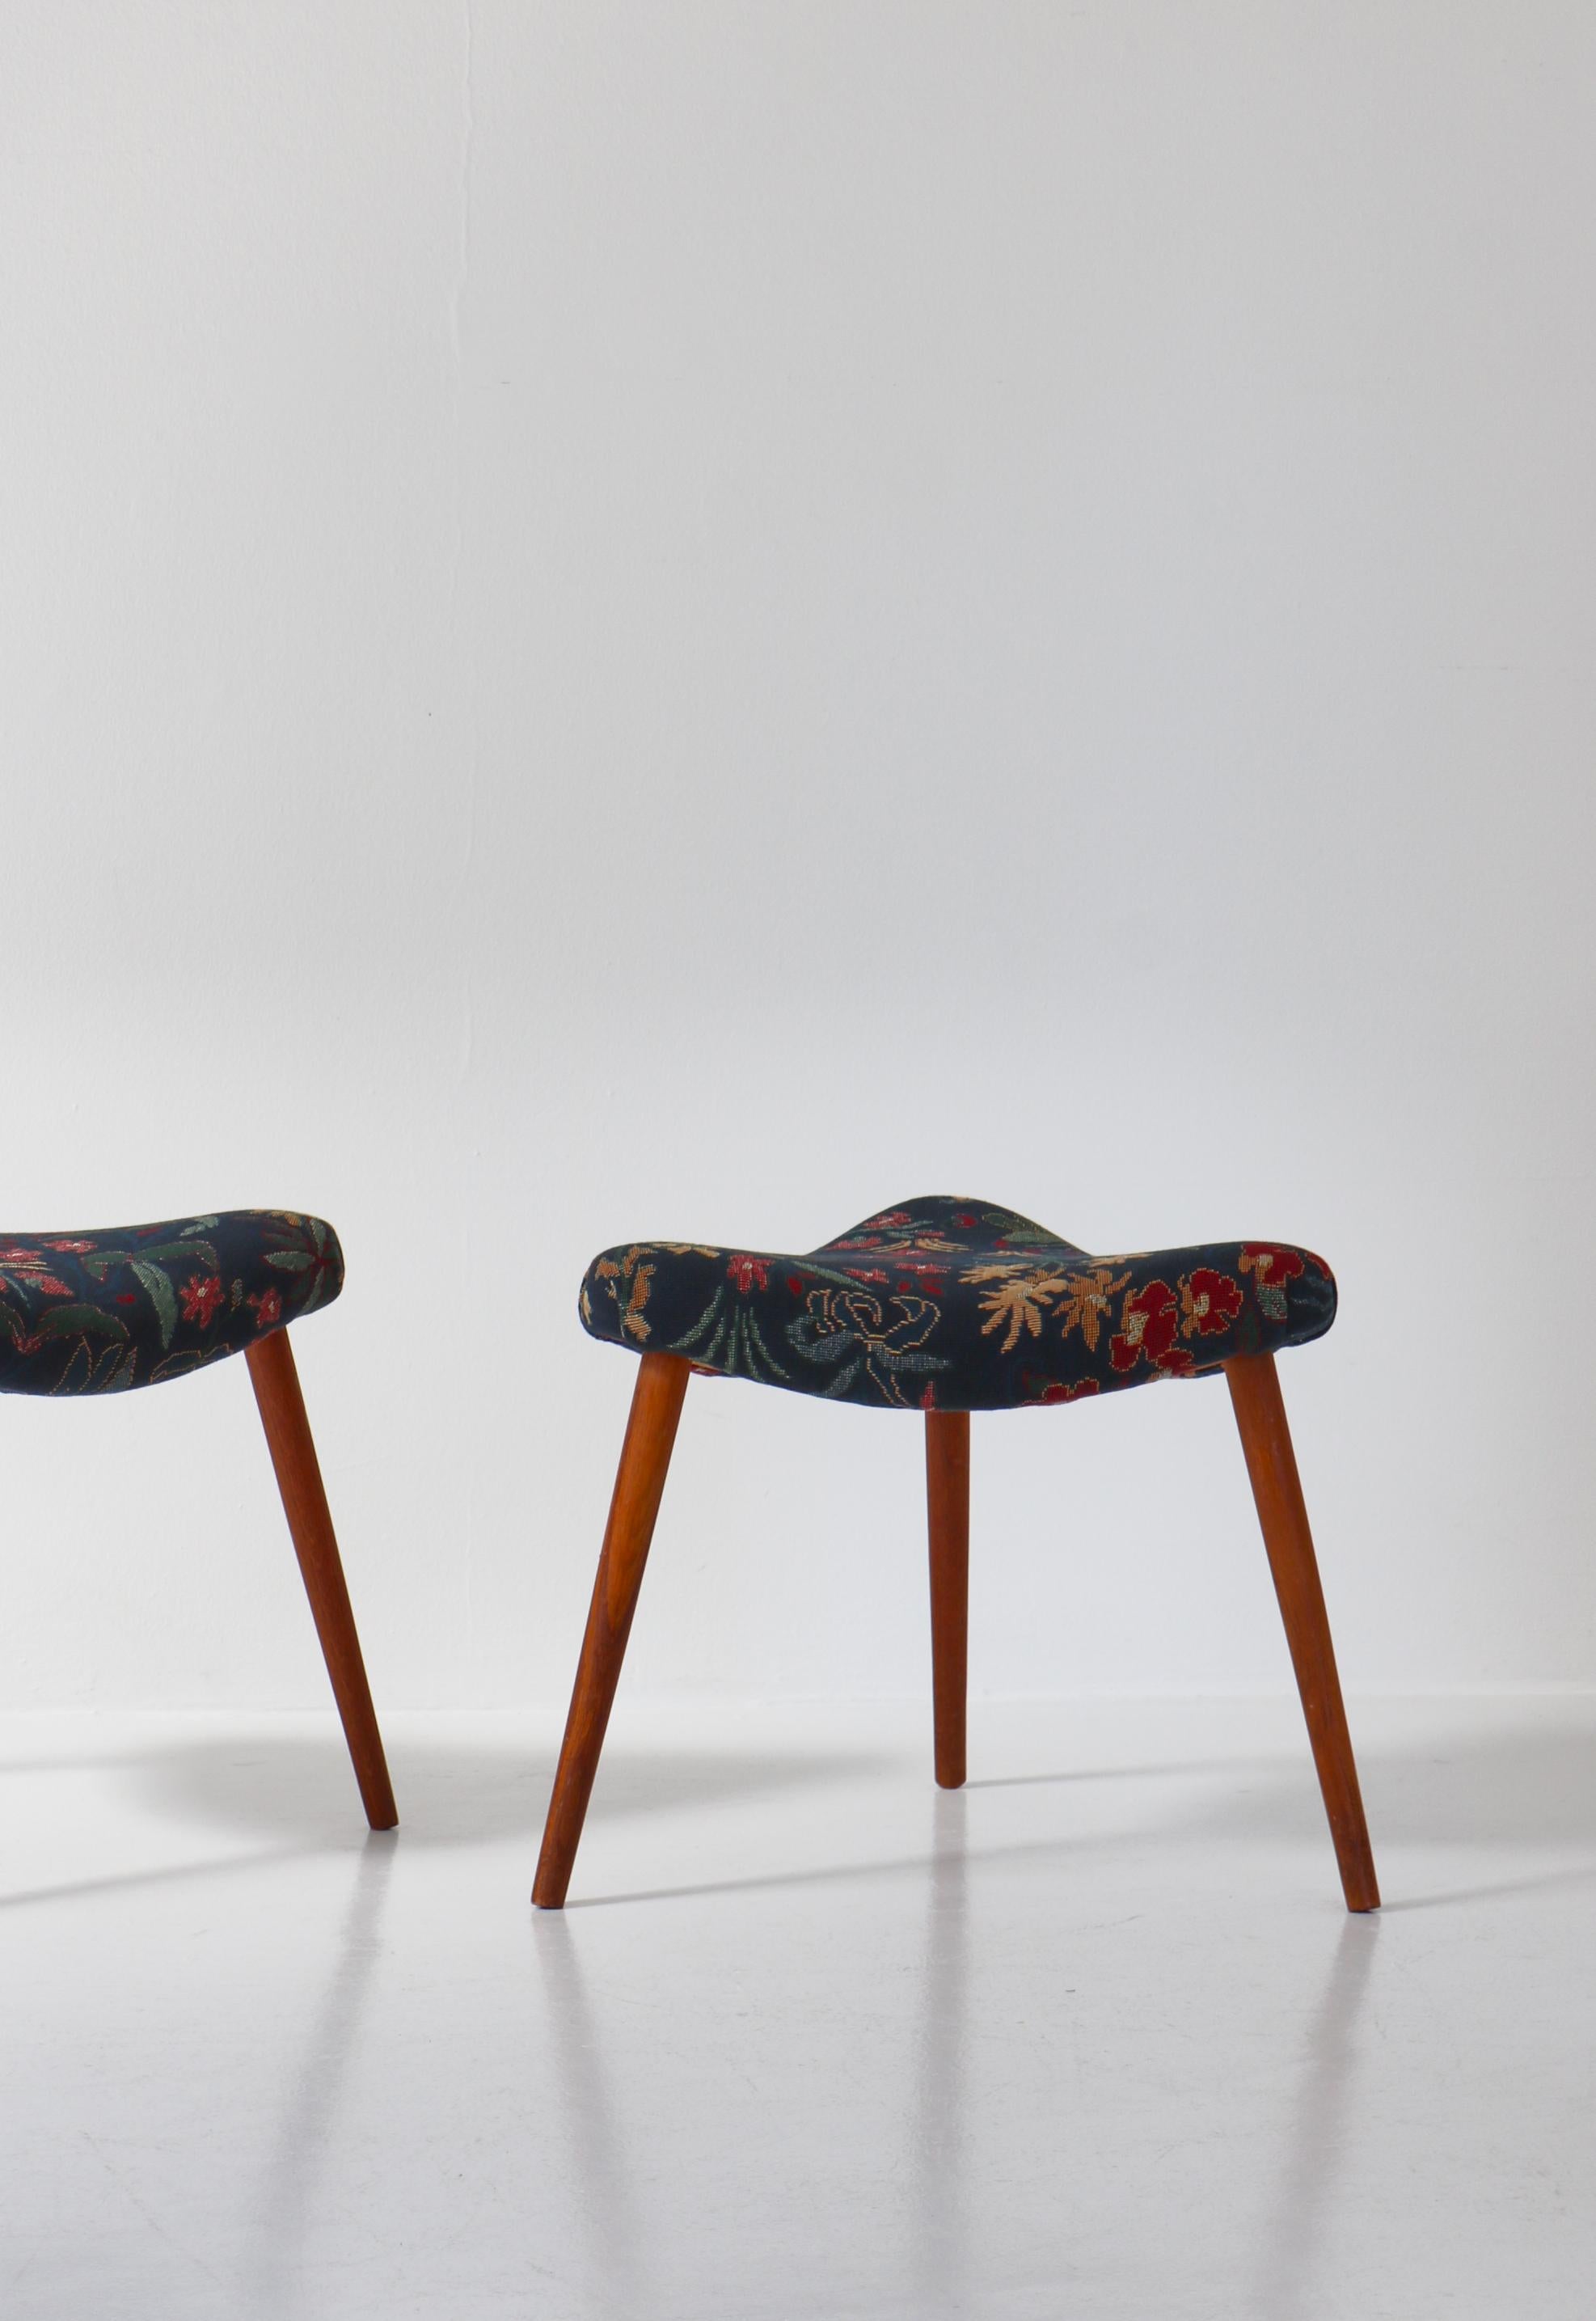 Mid-20th Century Scandinavian Modern Triangular Stools in Blue Floral Tapestry, 1950s For Sale